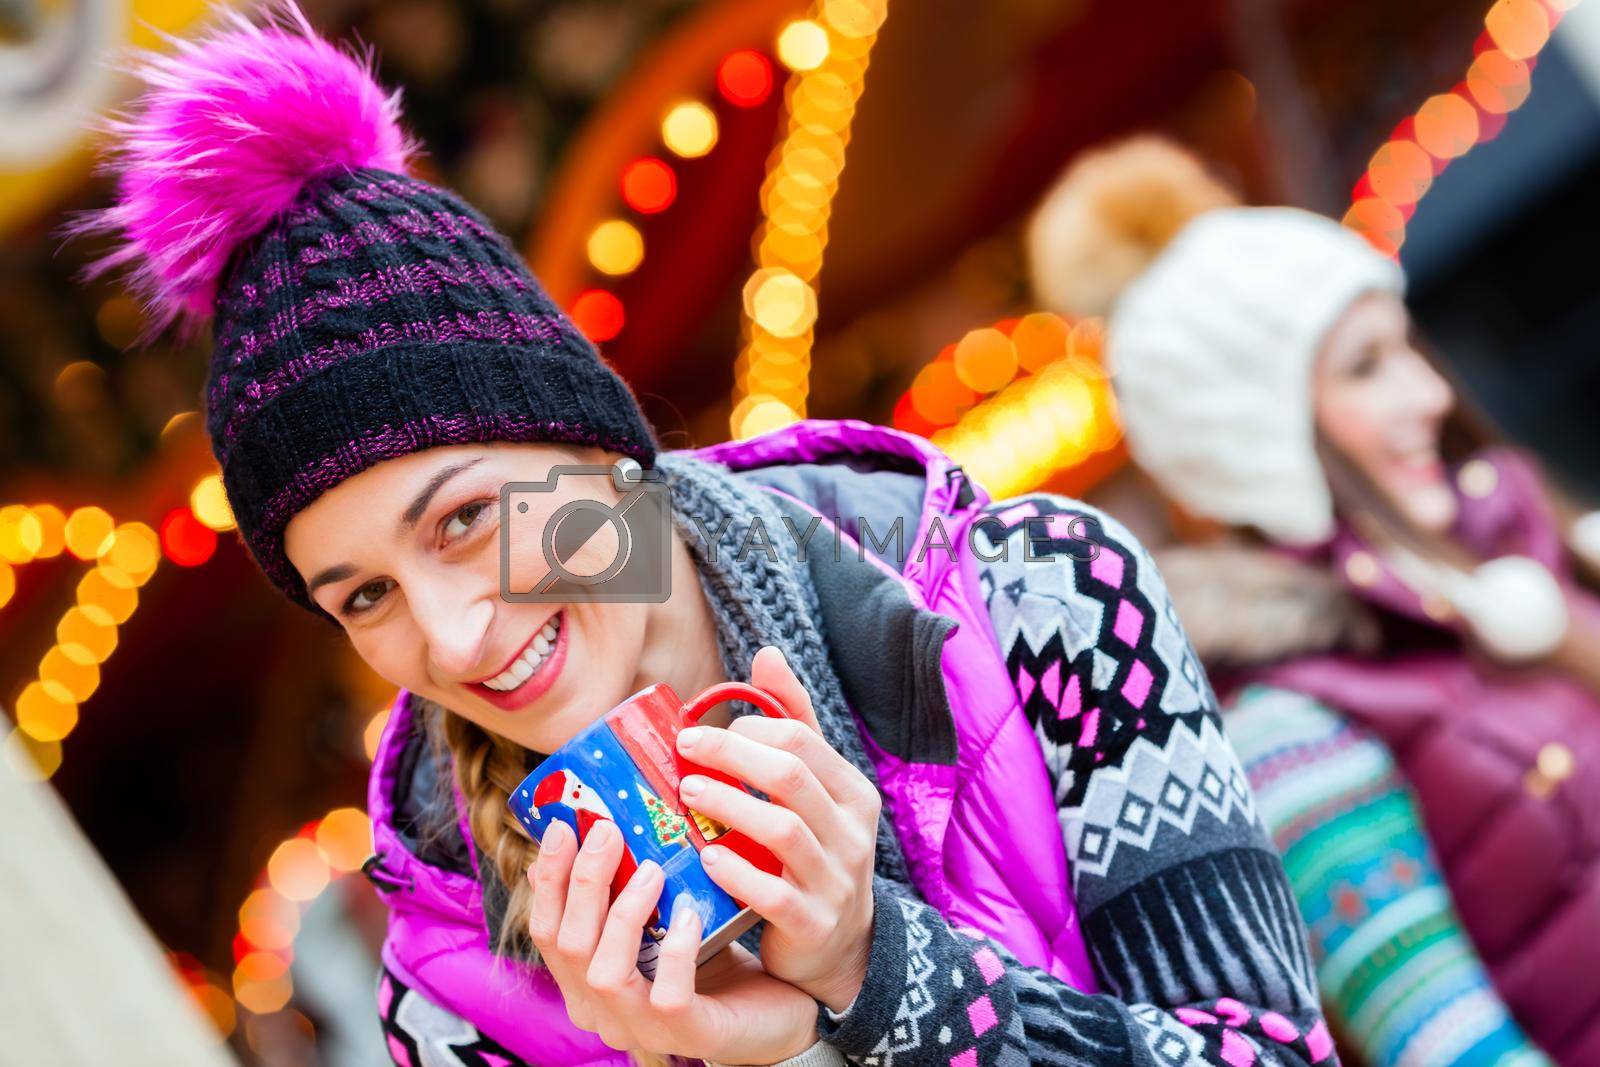 Royalty free image of Woman drinking eggnog on German Christmas Market by Kzenon